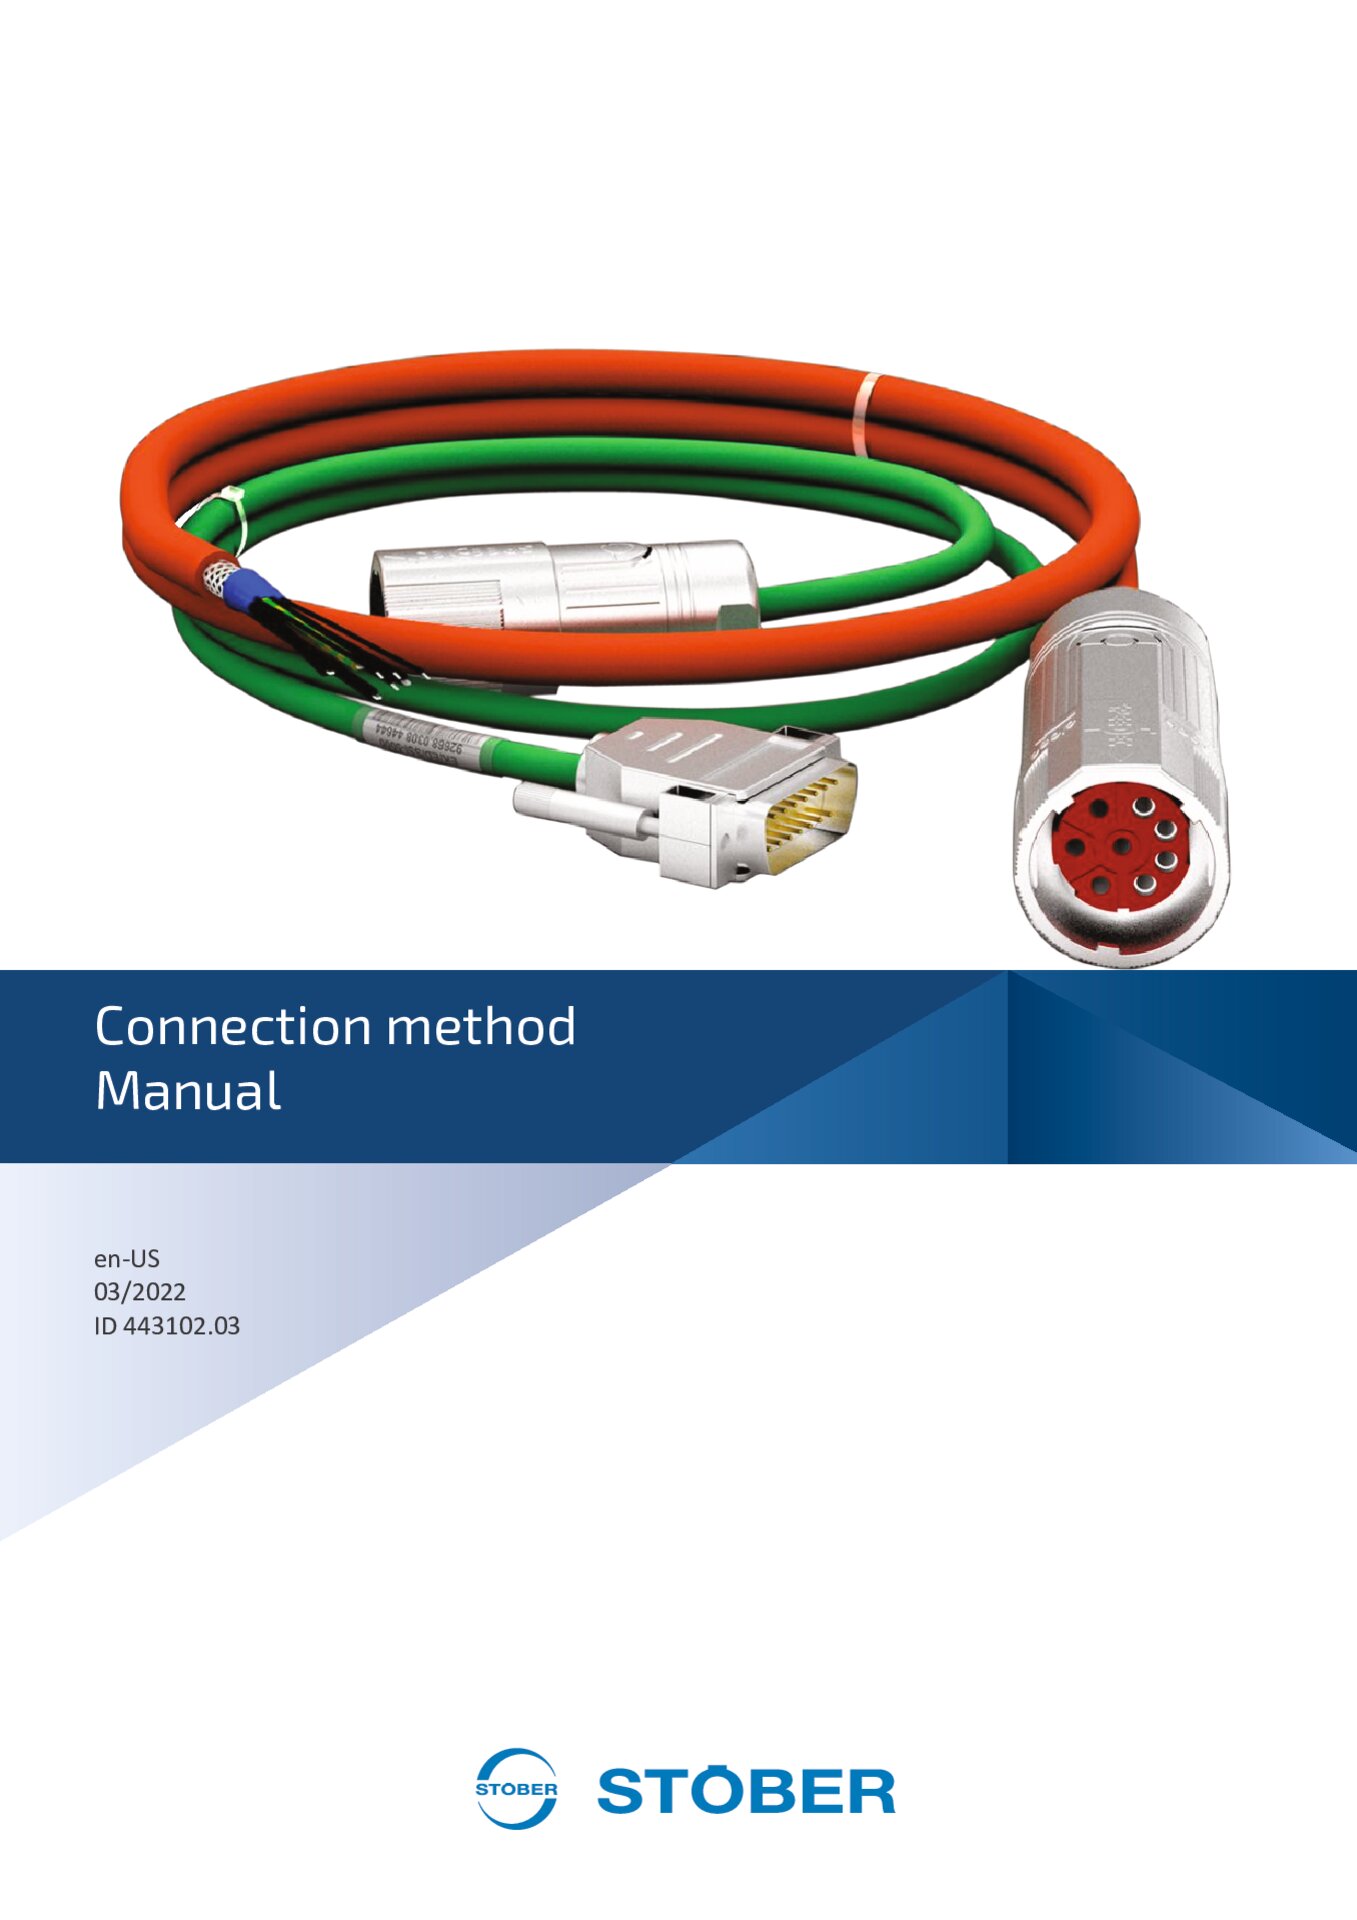 Manual Connection method